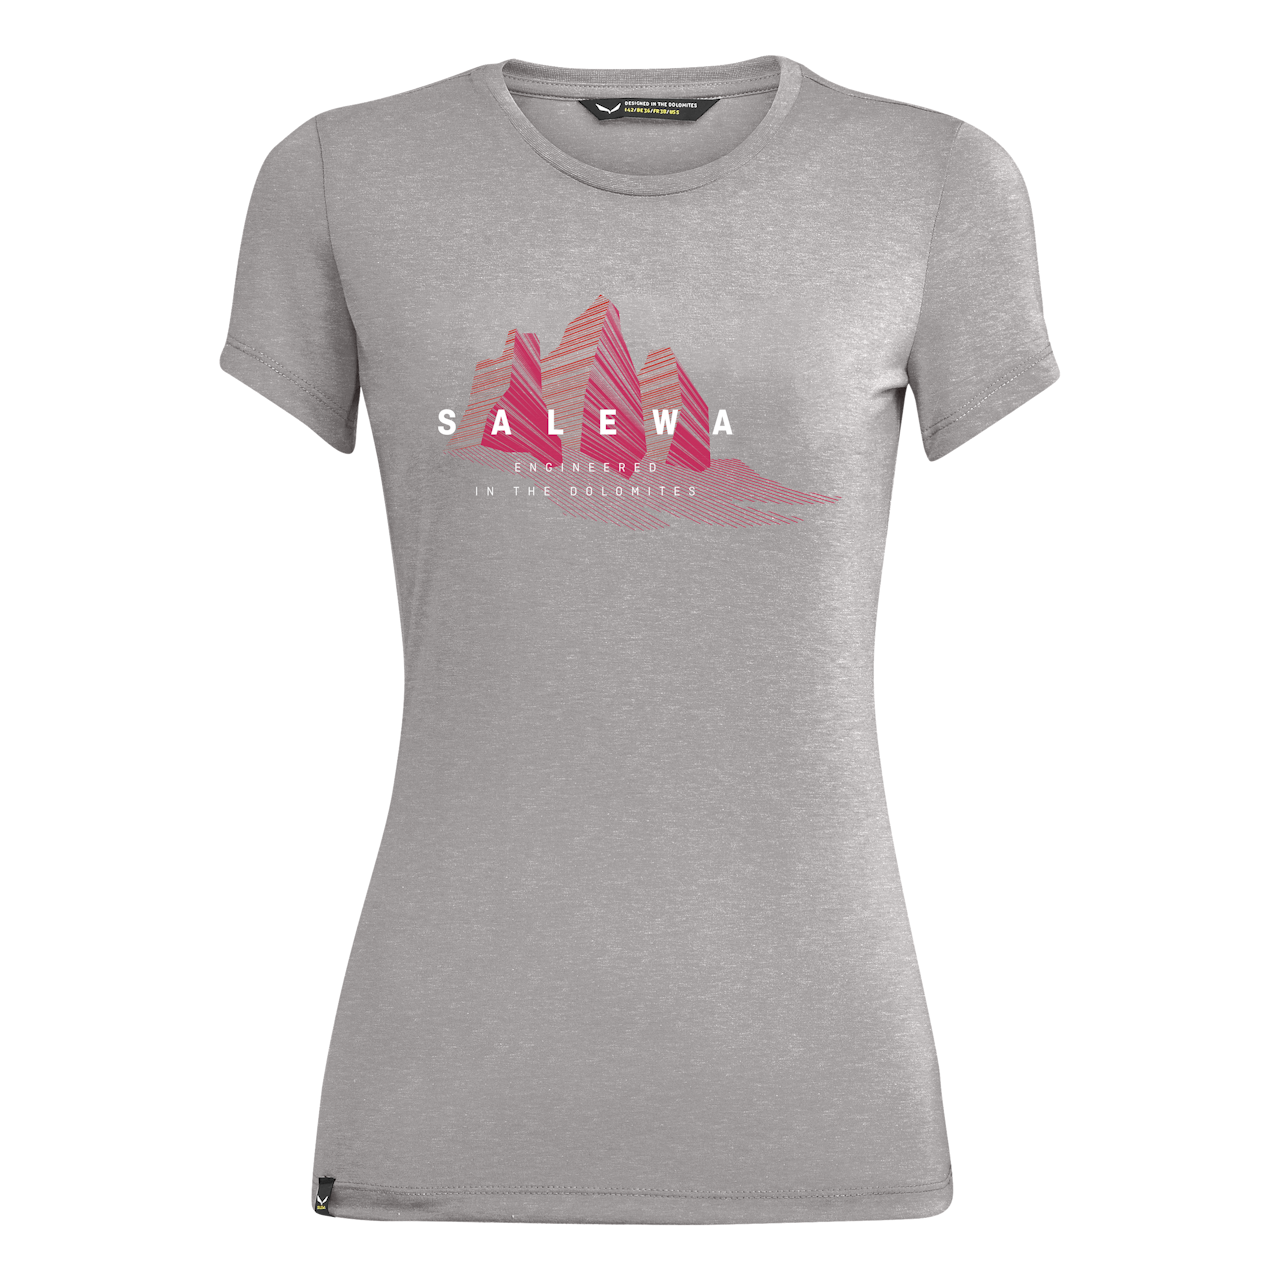 Lines Graphic Dry Women's T-Shirt